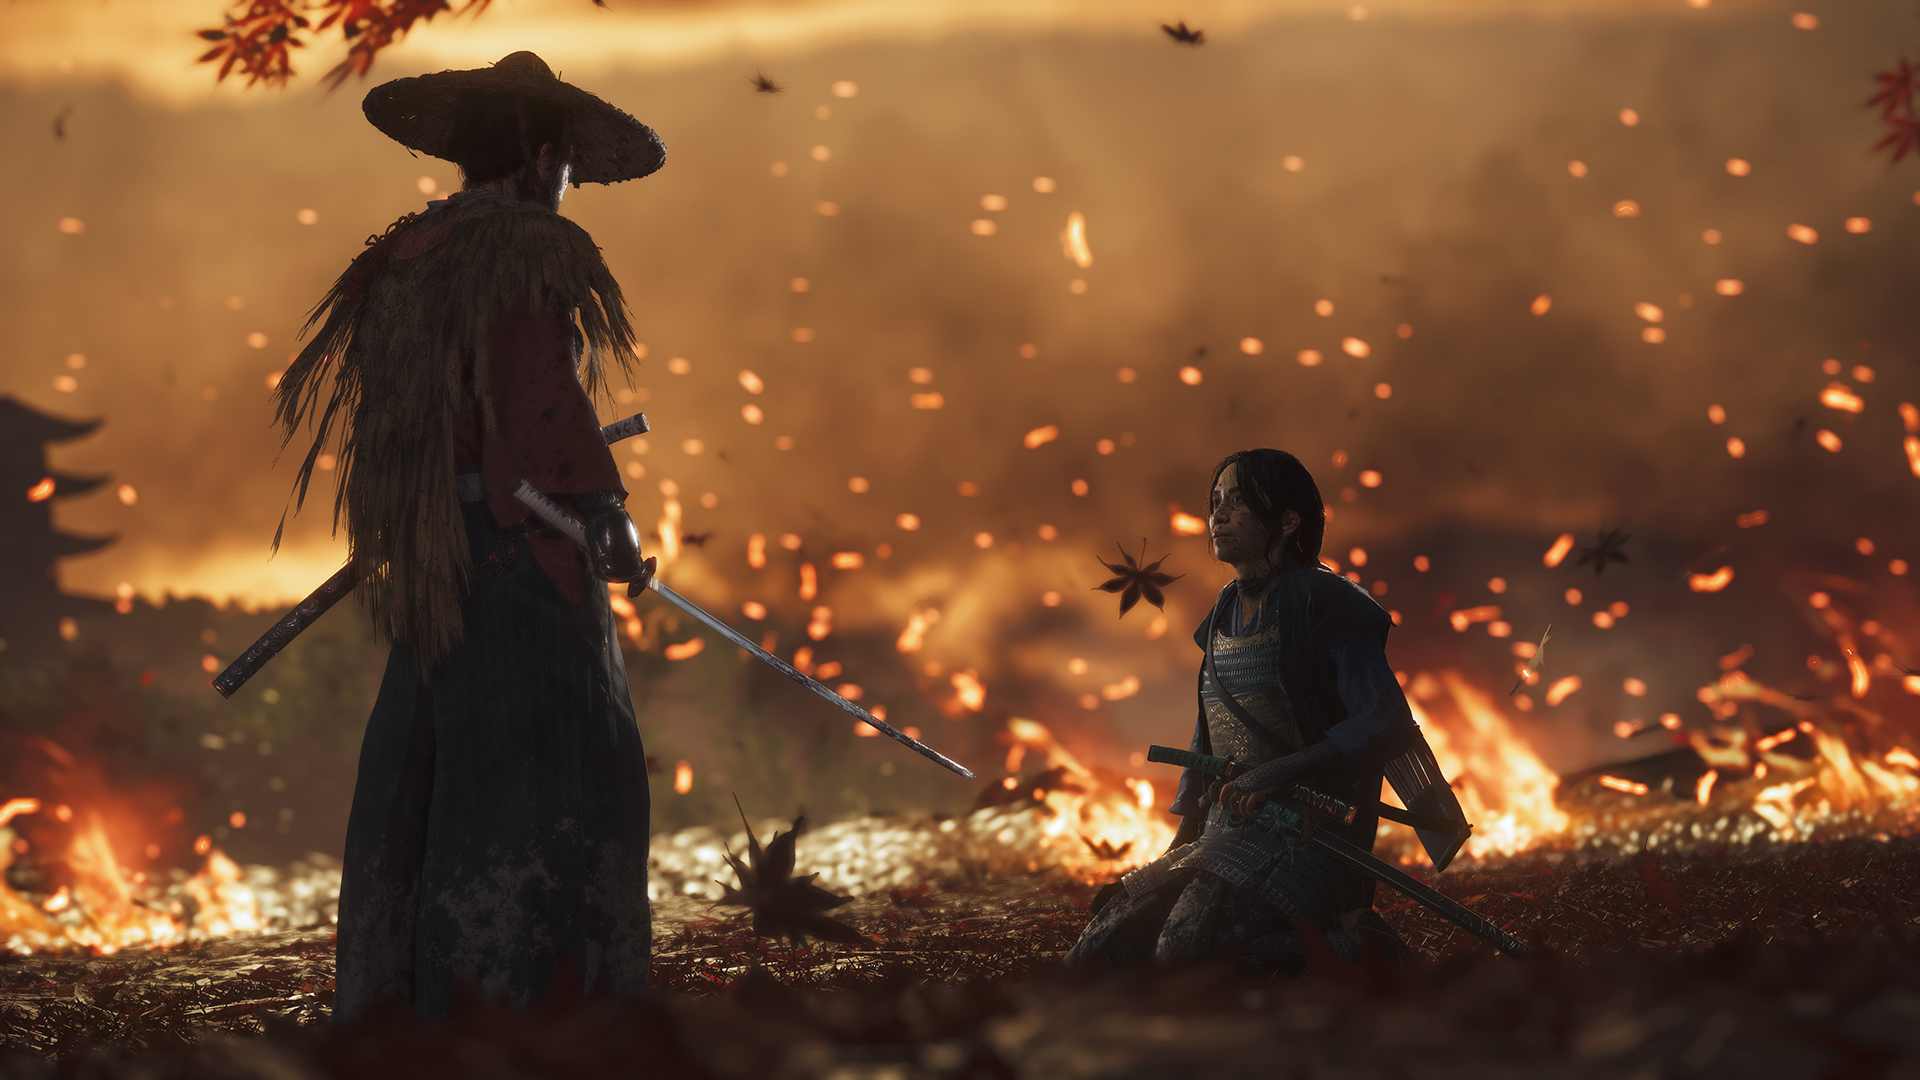 Ghost of Tsushima - Review Thread (MetaCritic: 83, OpenCritic: 85)